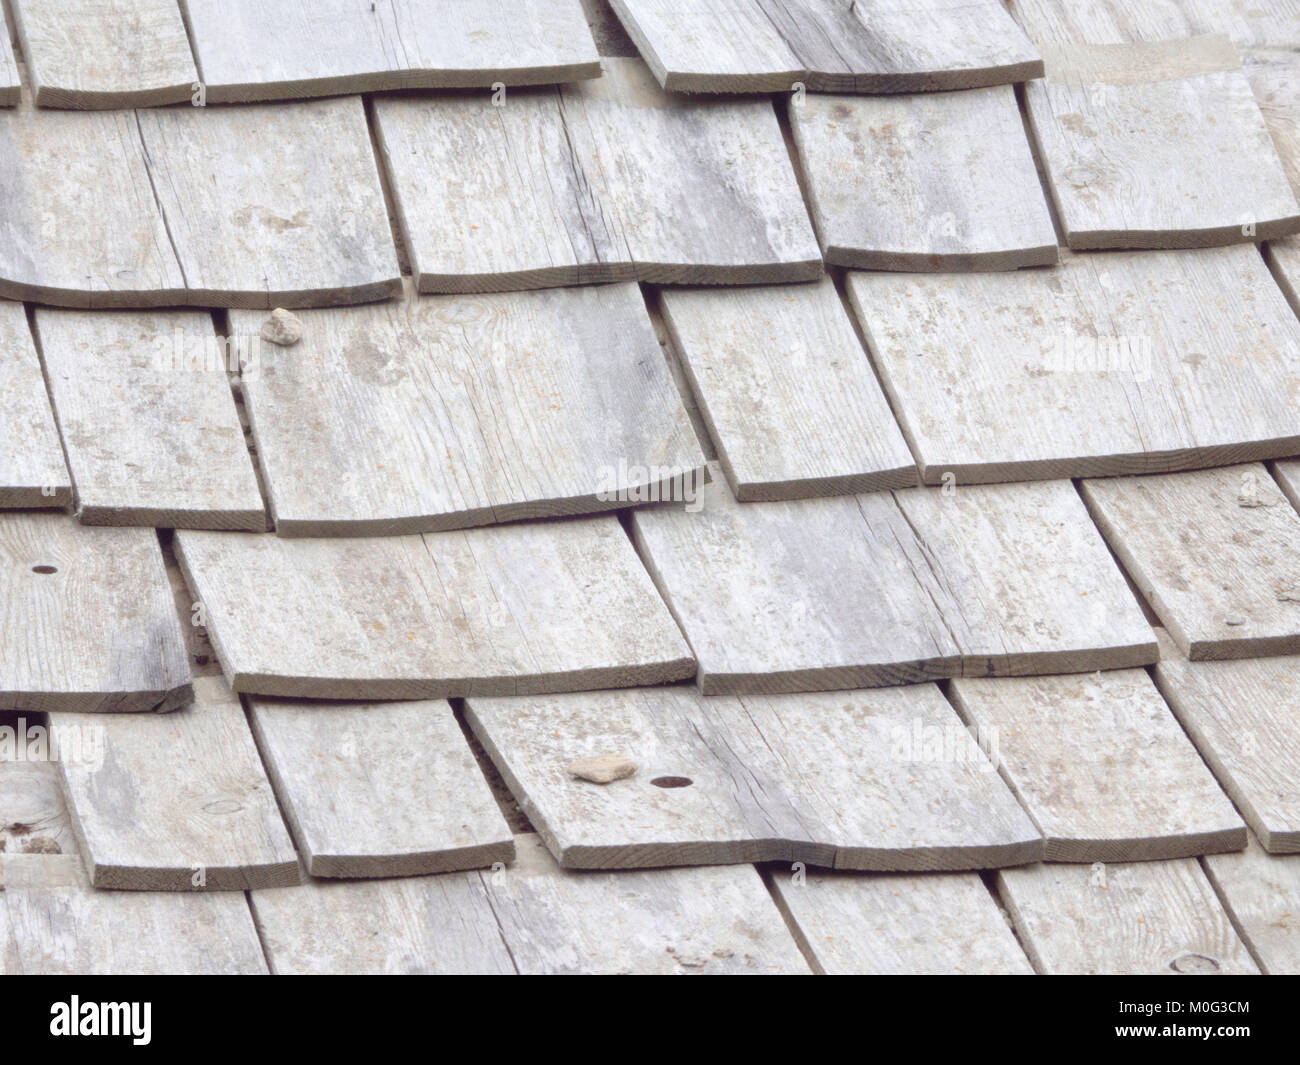 Wooden Roof Shingles ( A Type of Wooden Roof Tile ) Stock Photo